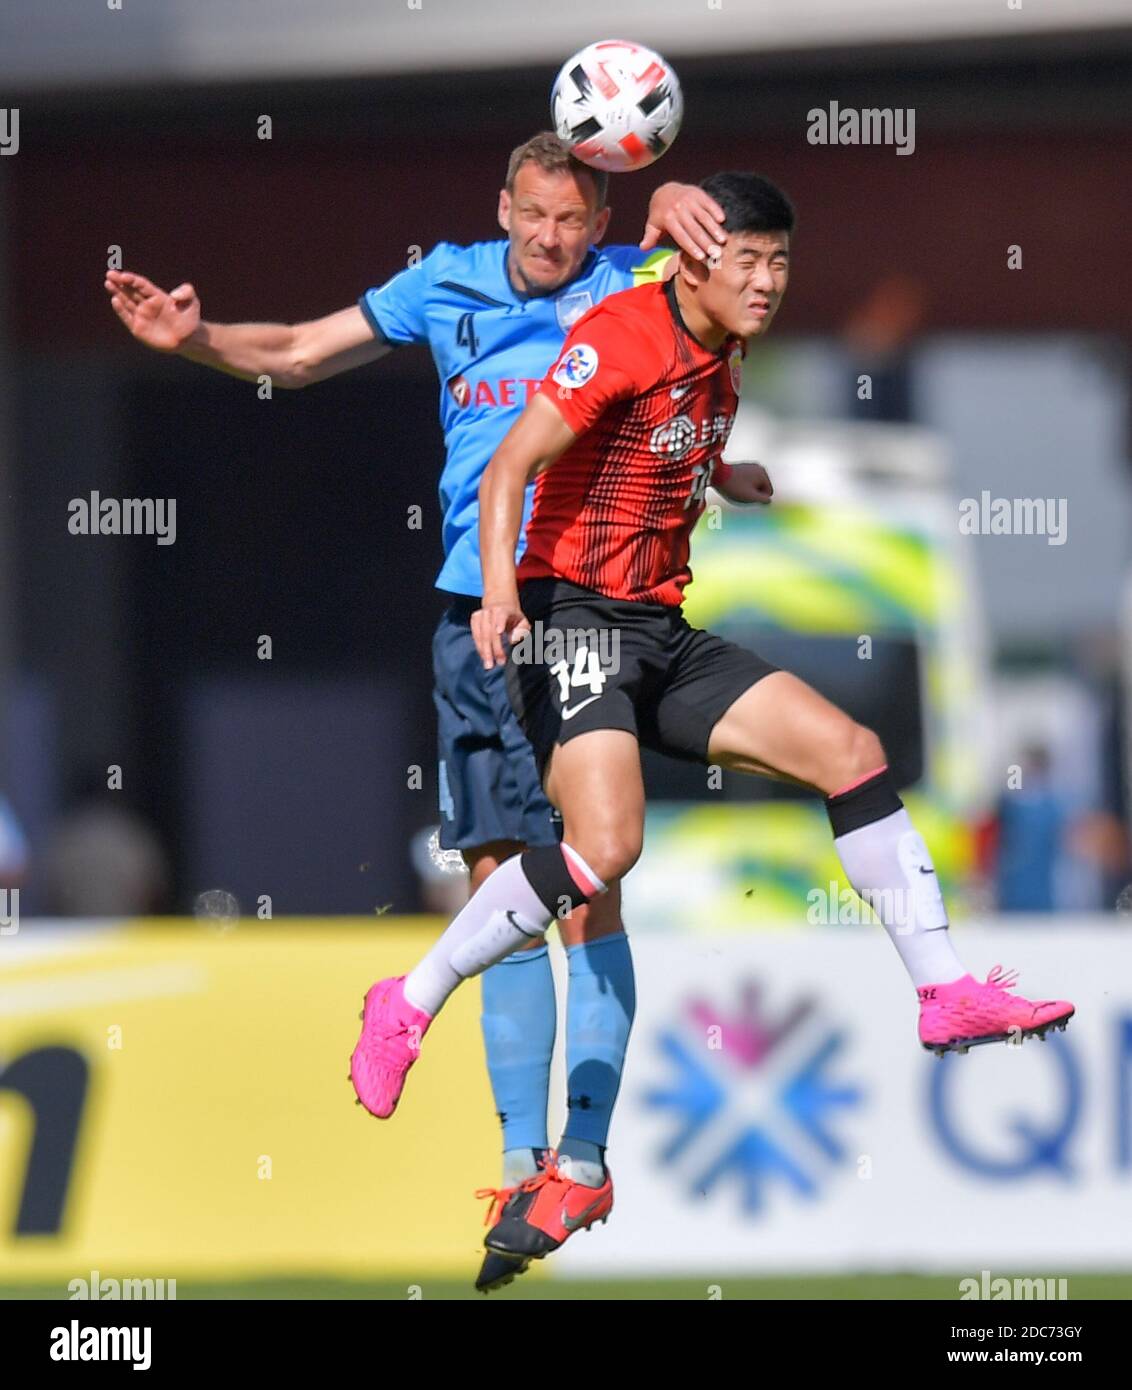 Doha, Qatar. 19th Nov, 2020. Shanghai SIPG's Li Shenglong (R) vies with Sydney FC's Alex Wilkinson during the group H match between Sydney FC of Australia and Shanghai SIPG of China at the AFC Champions League 2020 in Doha, capital of Qatar, Nov. 19, 2020. Credit: Nikku/Xinhua/Alamy Live News Stock Photo